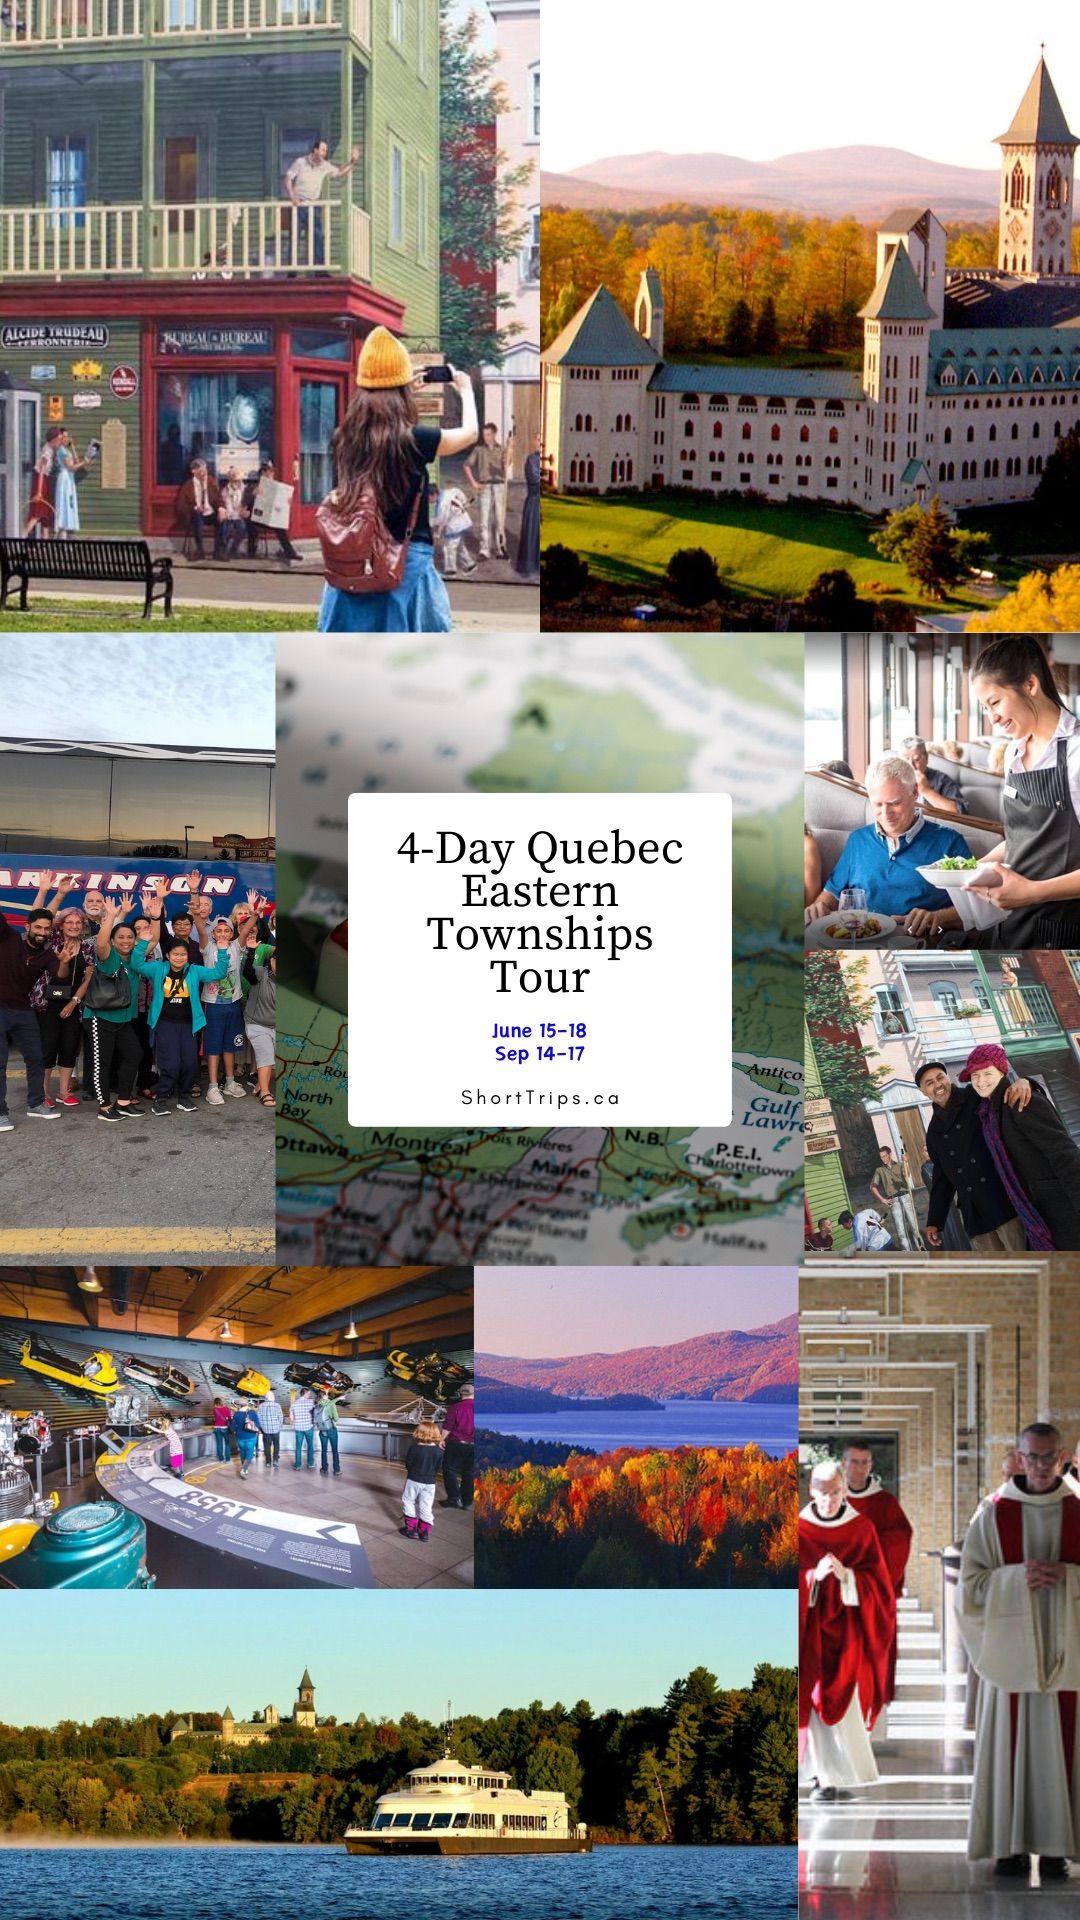 4-Day Quebec Eastern Townships Tour